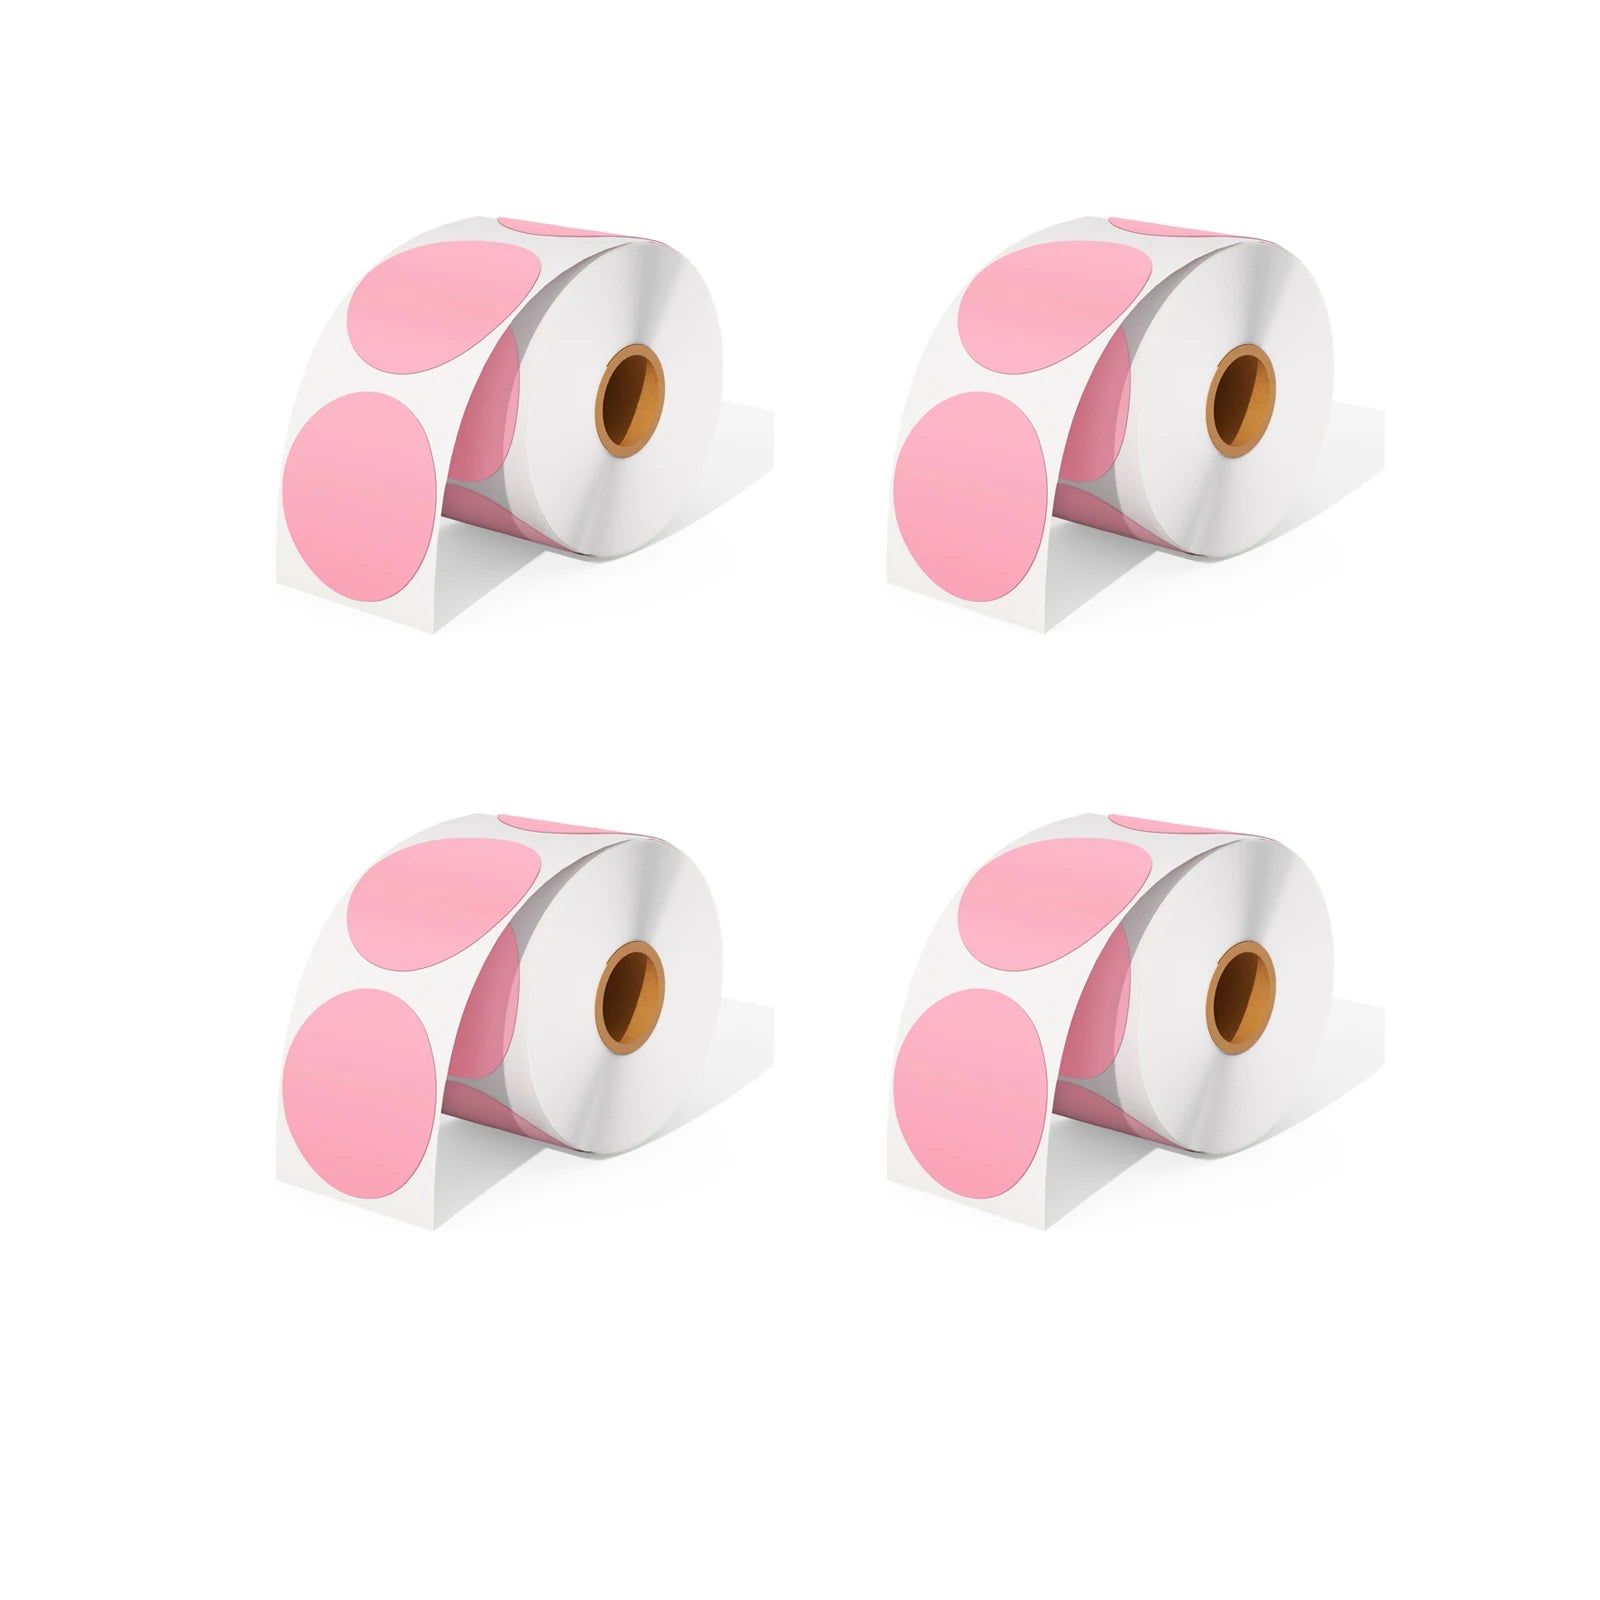 MUNBYN offers four rolls of pink direct thermal round labels as a kit, with 750 labels per roll.